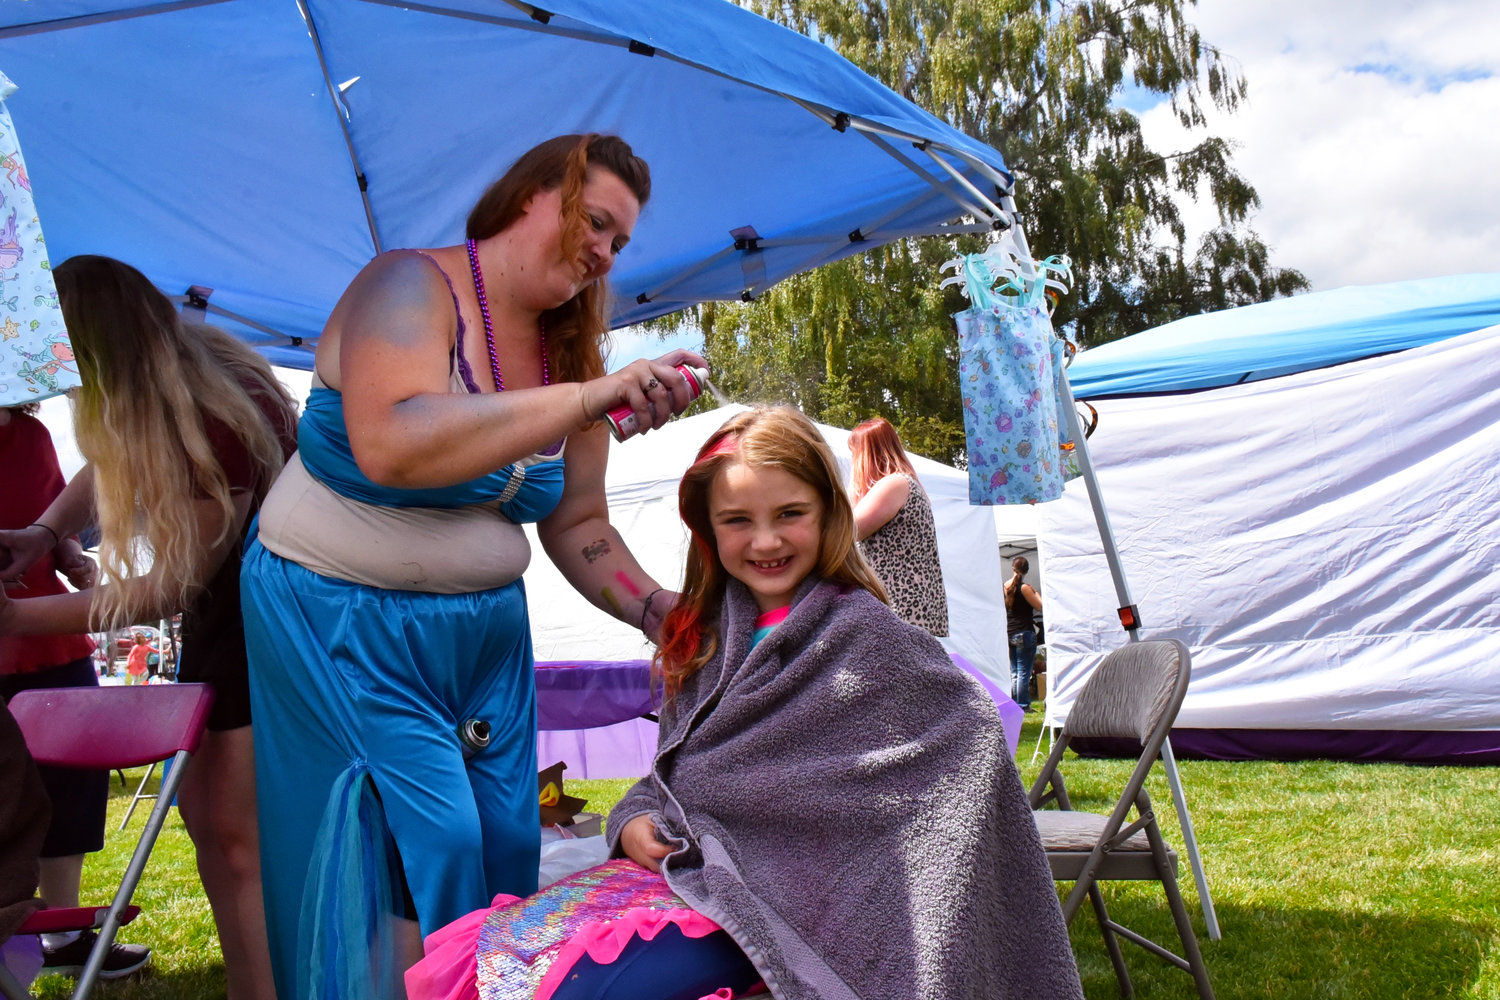 What's a mermaid festival without mermaid hair? One antendee of the 2021 Yelm Mermaid Festival gets colorful hair on Saturday, July 17, at Yelm City Park.